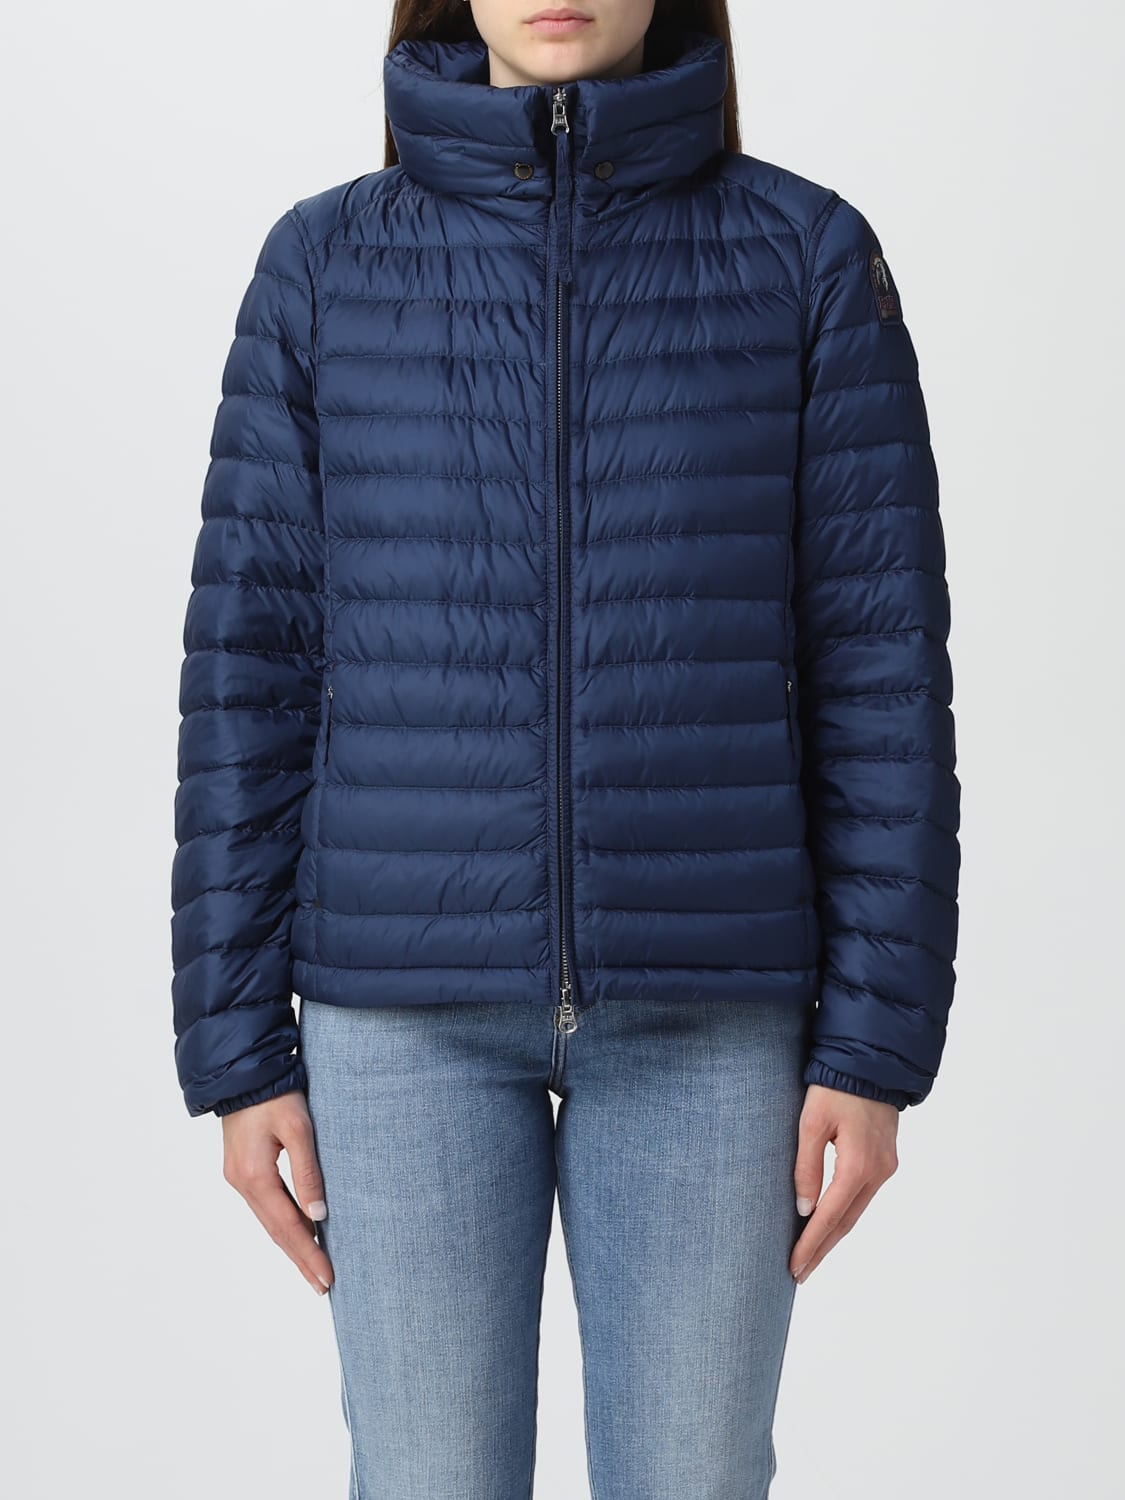 Parajumpers Outlet: jacket for woman - Blue | Parajumpers jacket  23SMPWPUFHY32 online at GIGLIO.COM